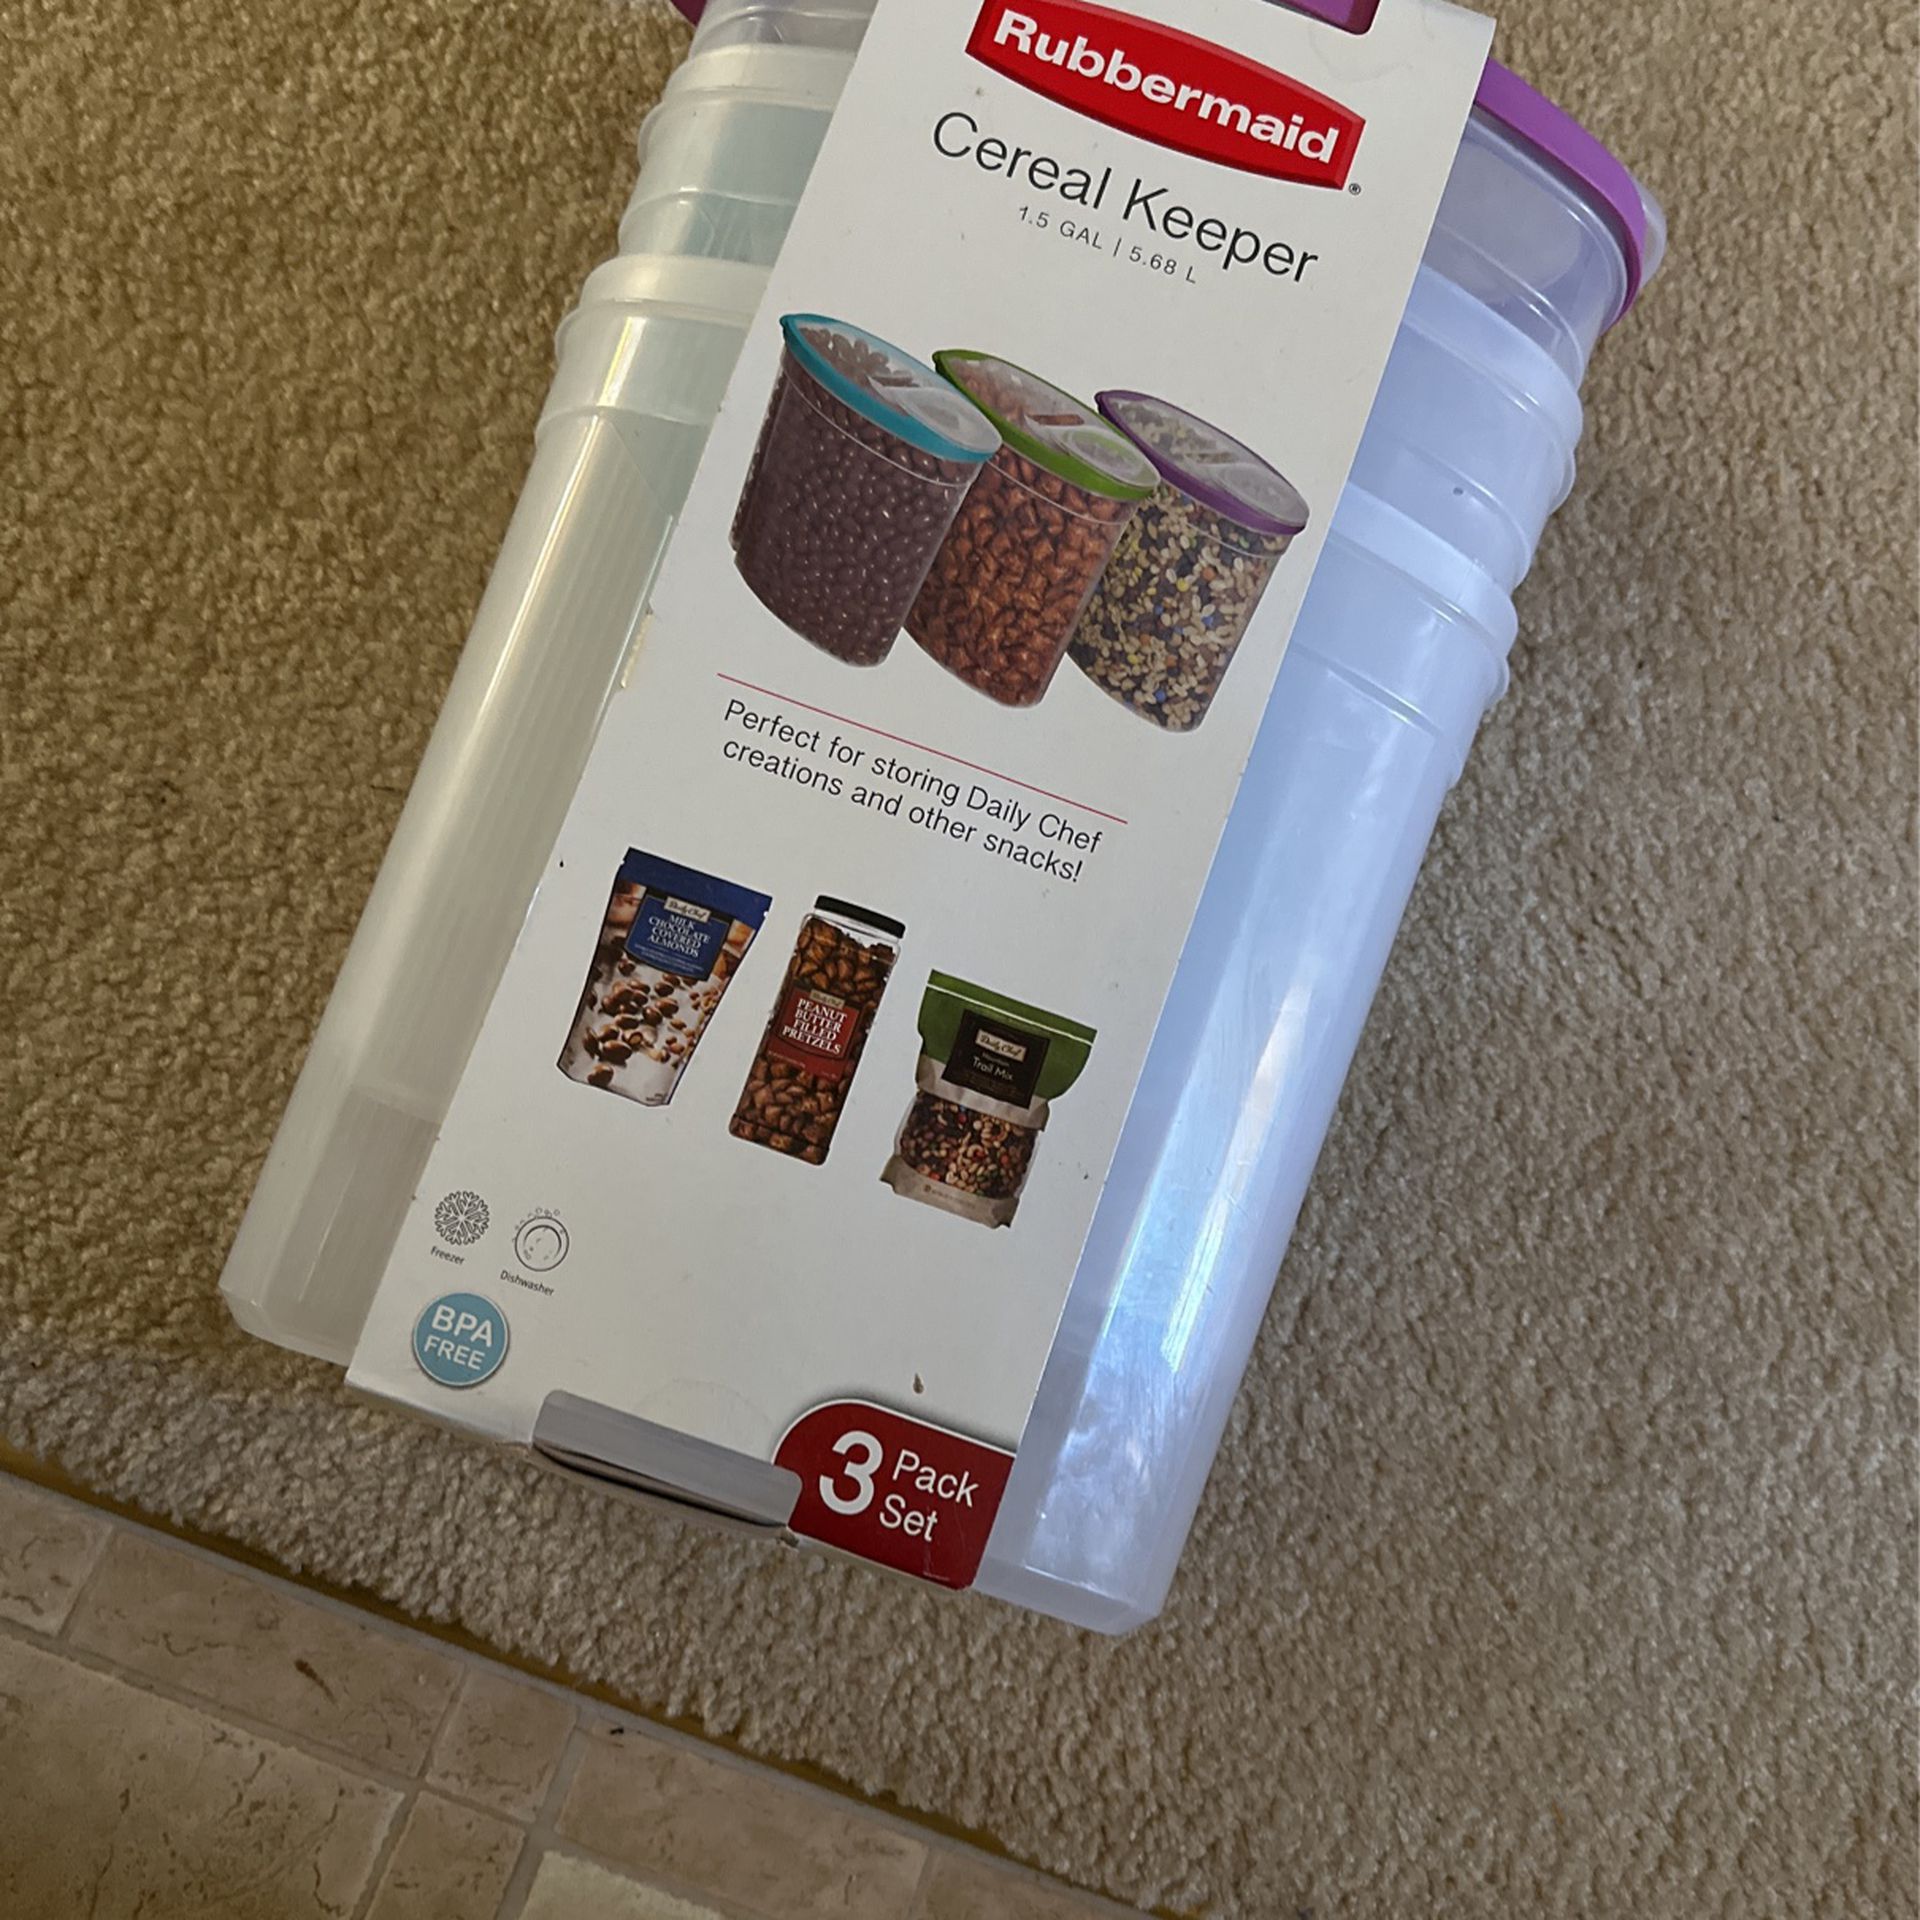 Rubbermaid Cereal Keeper, 3 Pack